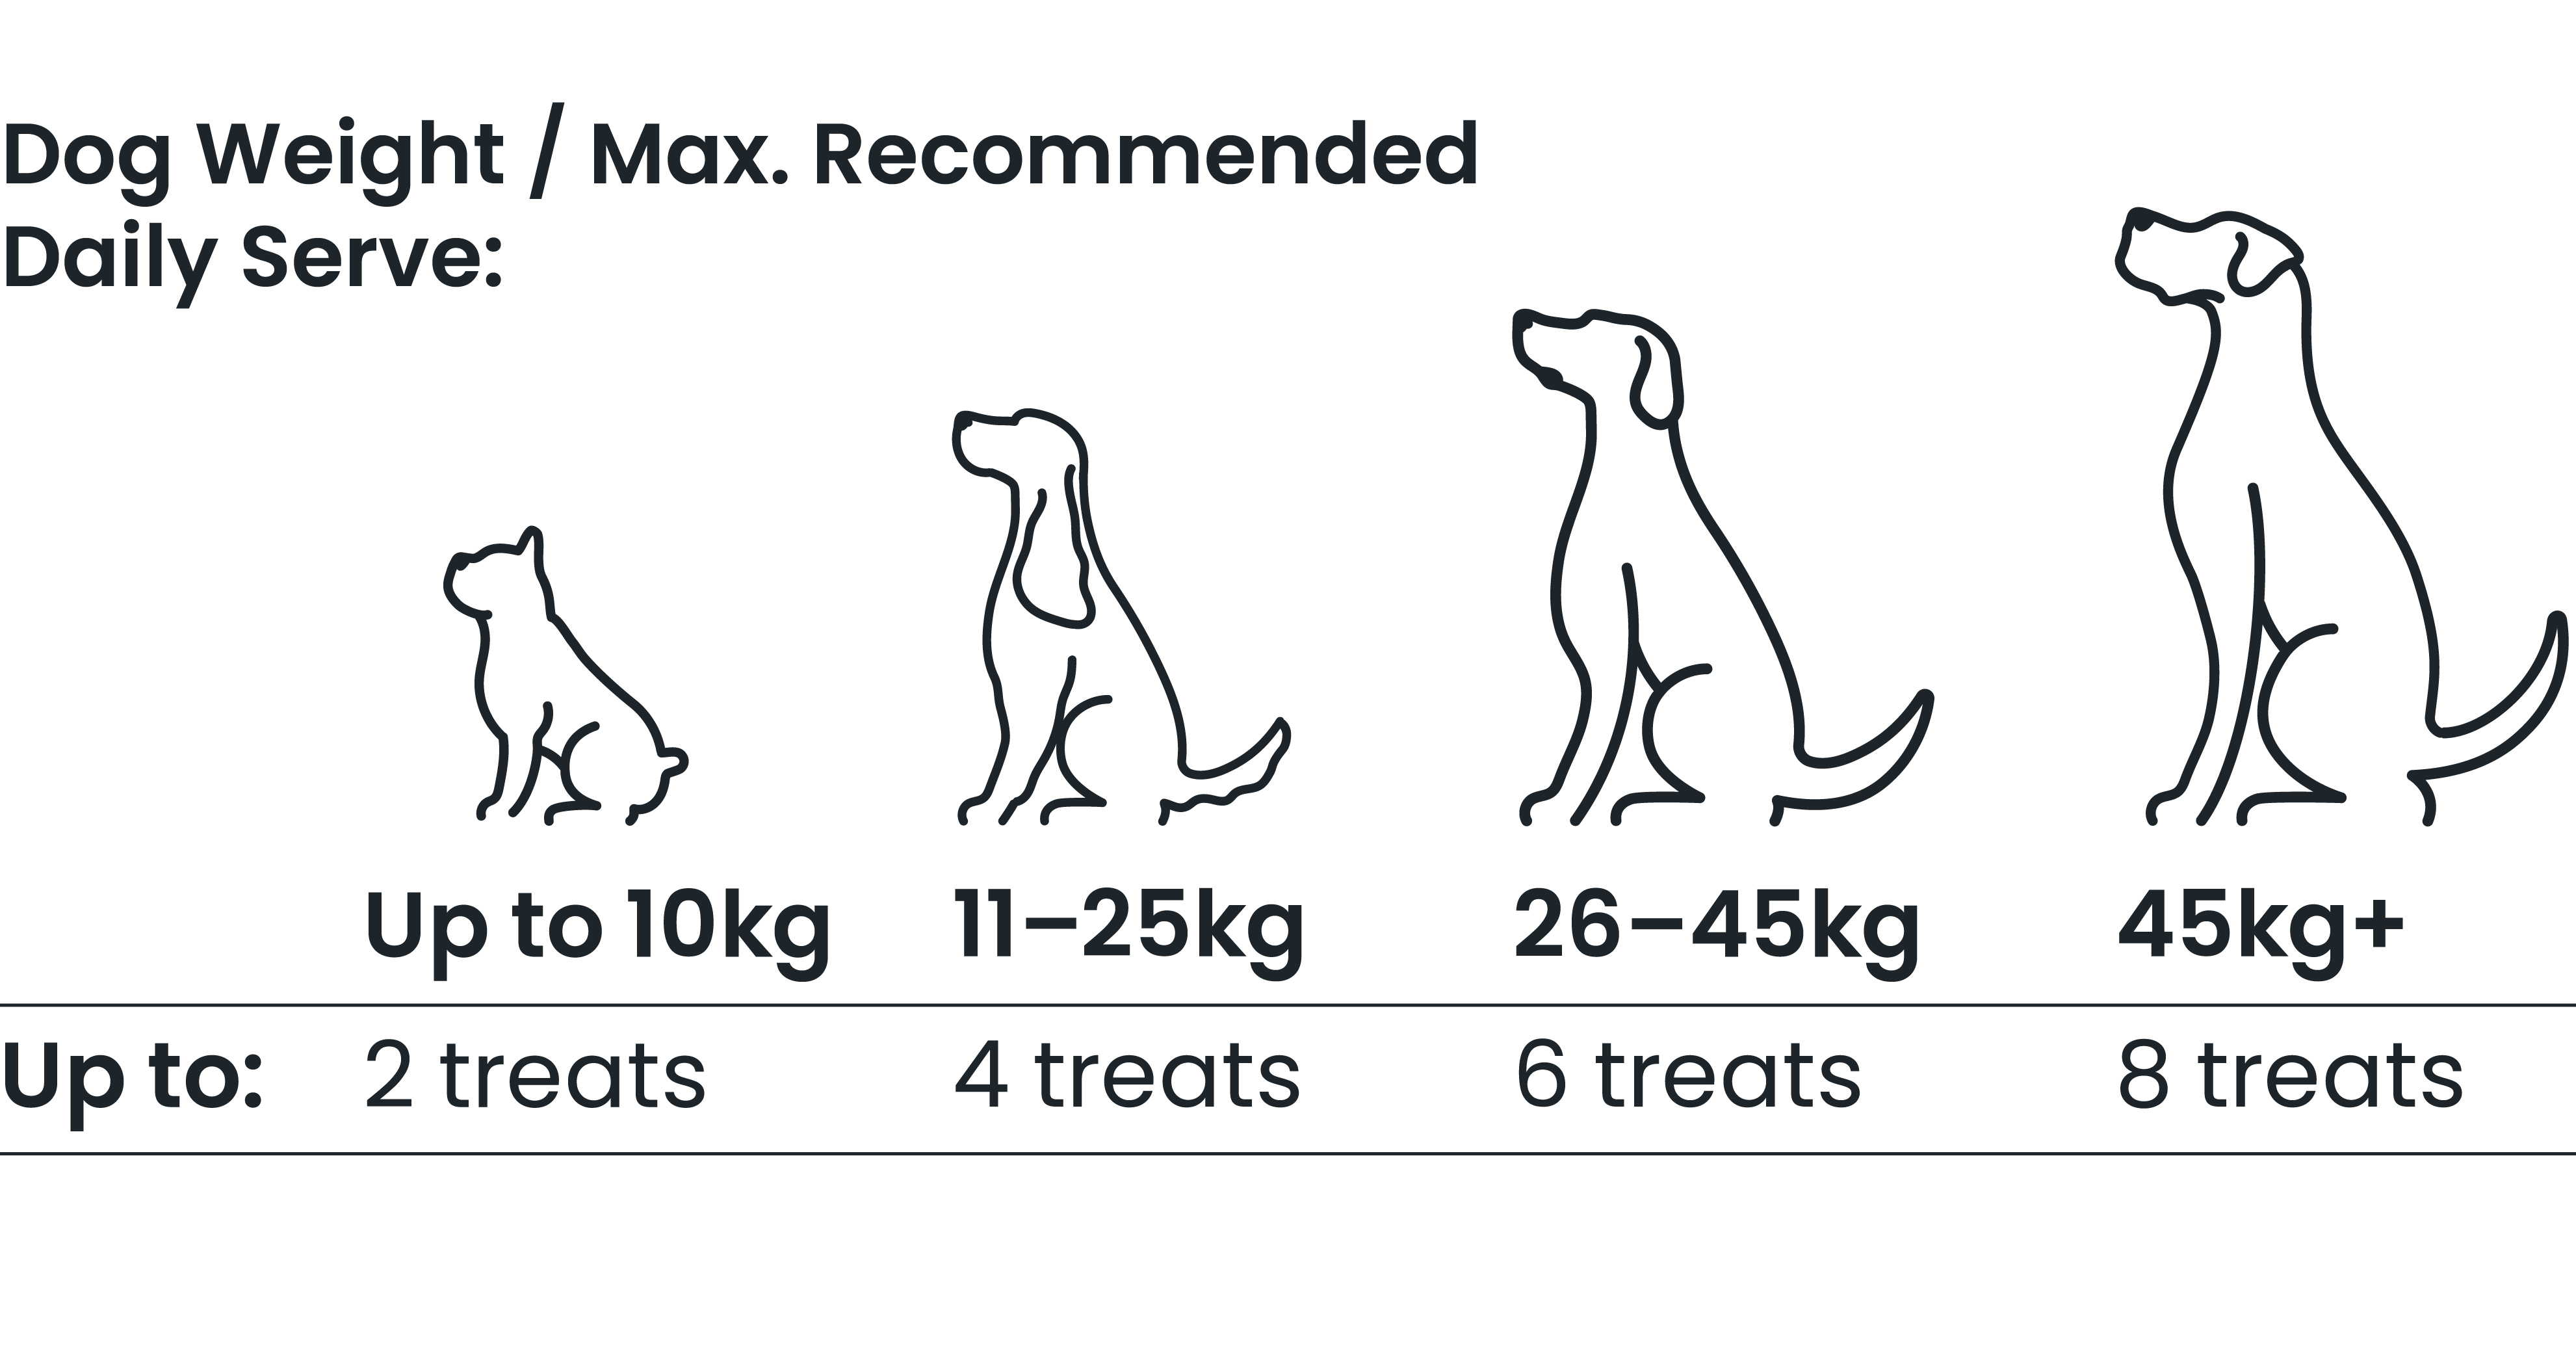 ZamiPet HappiTreats Joints feeding guide. For dogs up to 10kg, max 2 treats per day. For 11kg-25kg dogs, up to 4 treats per day. For 26-45kg dogs, up to 6 treats per day. For dogs 45kg and over, up to 8 treats per day. 